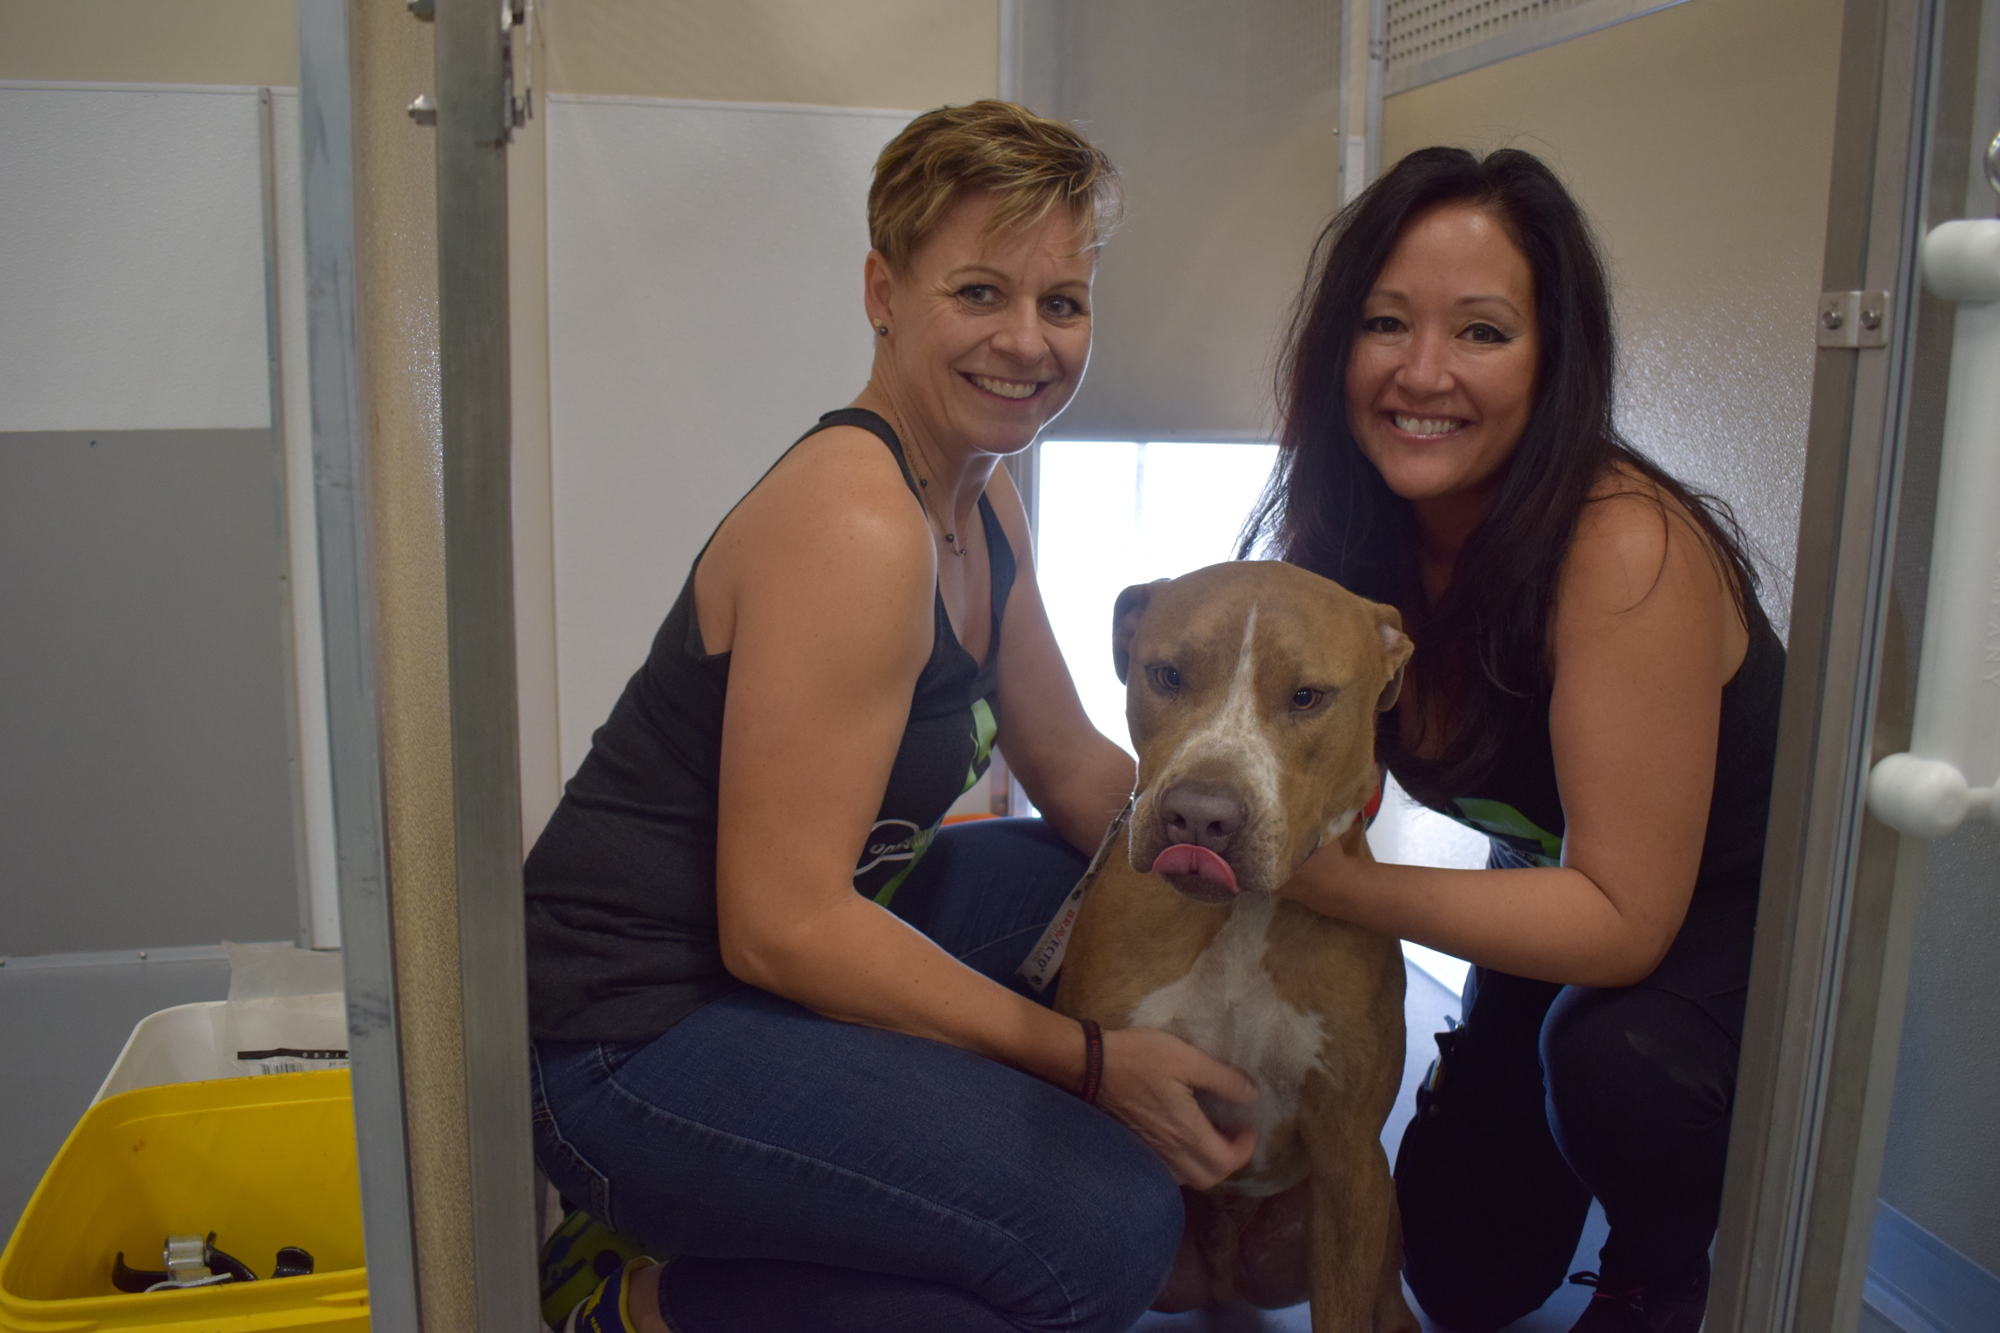 Monaka Oberer and Rebekah Boudrie pose with Cody, a pit bull who is up for adoption at the Humane Society of Lakewood Ranch.